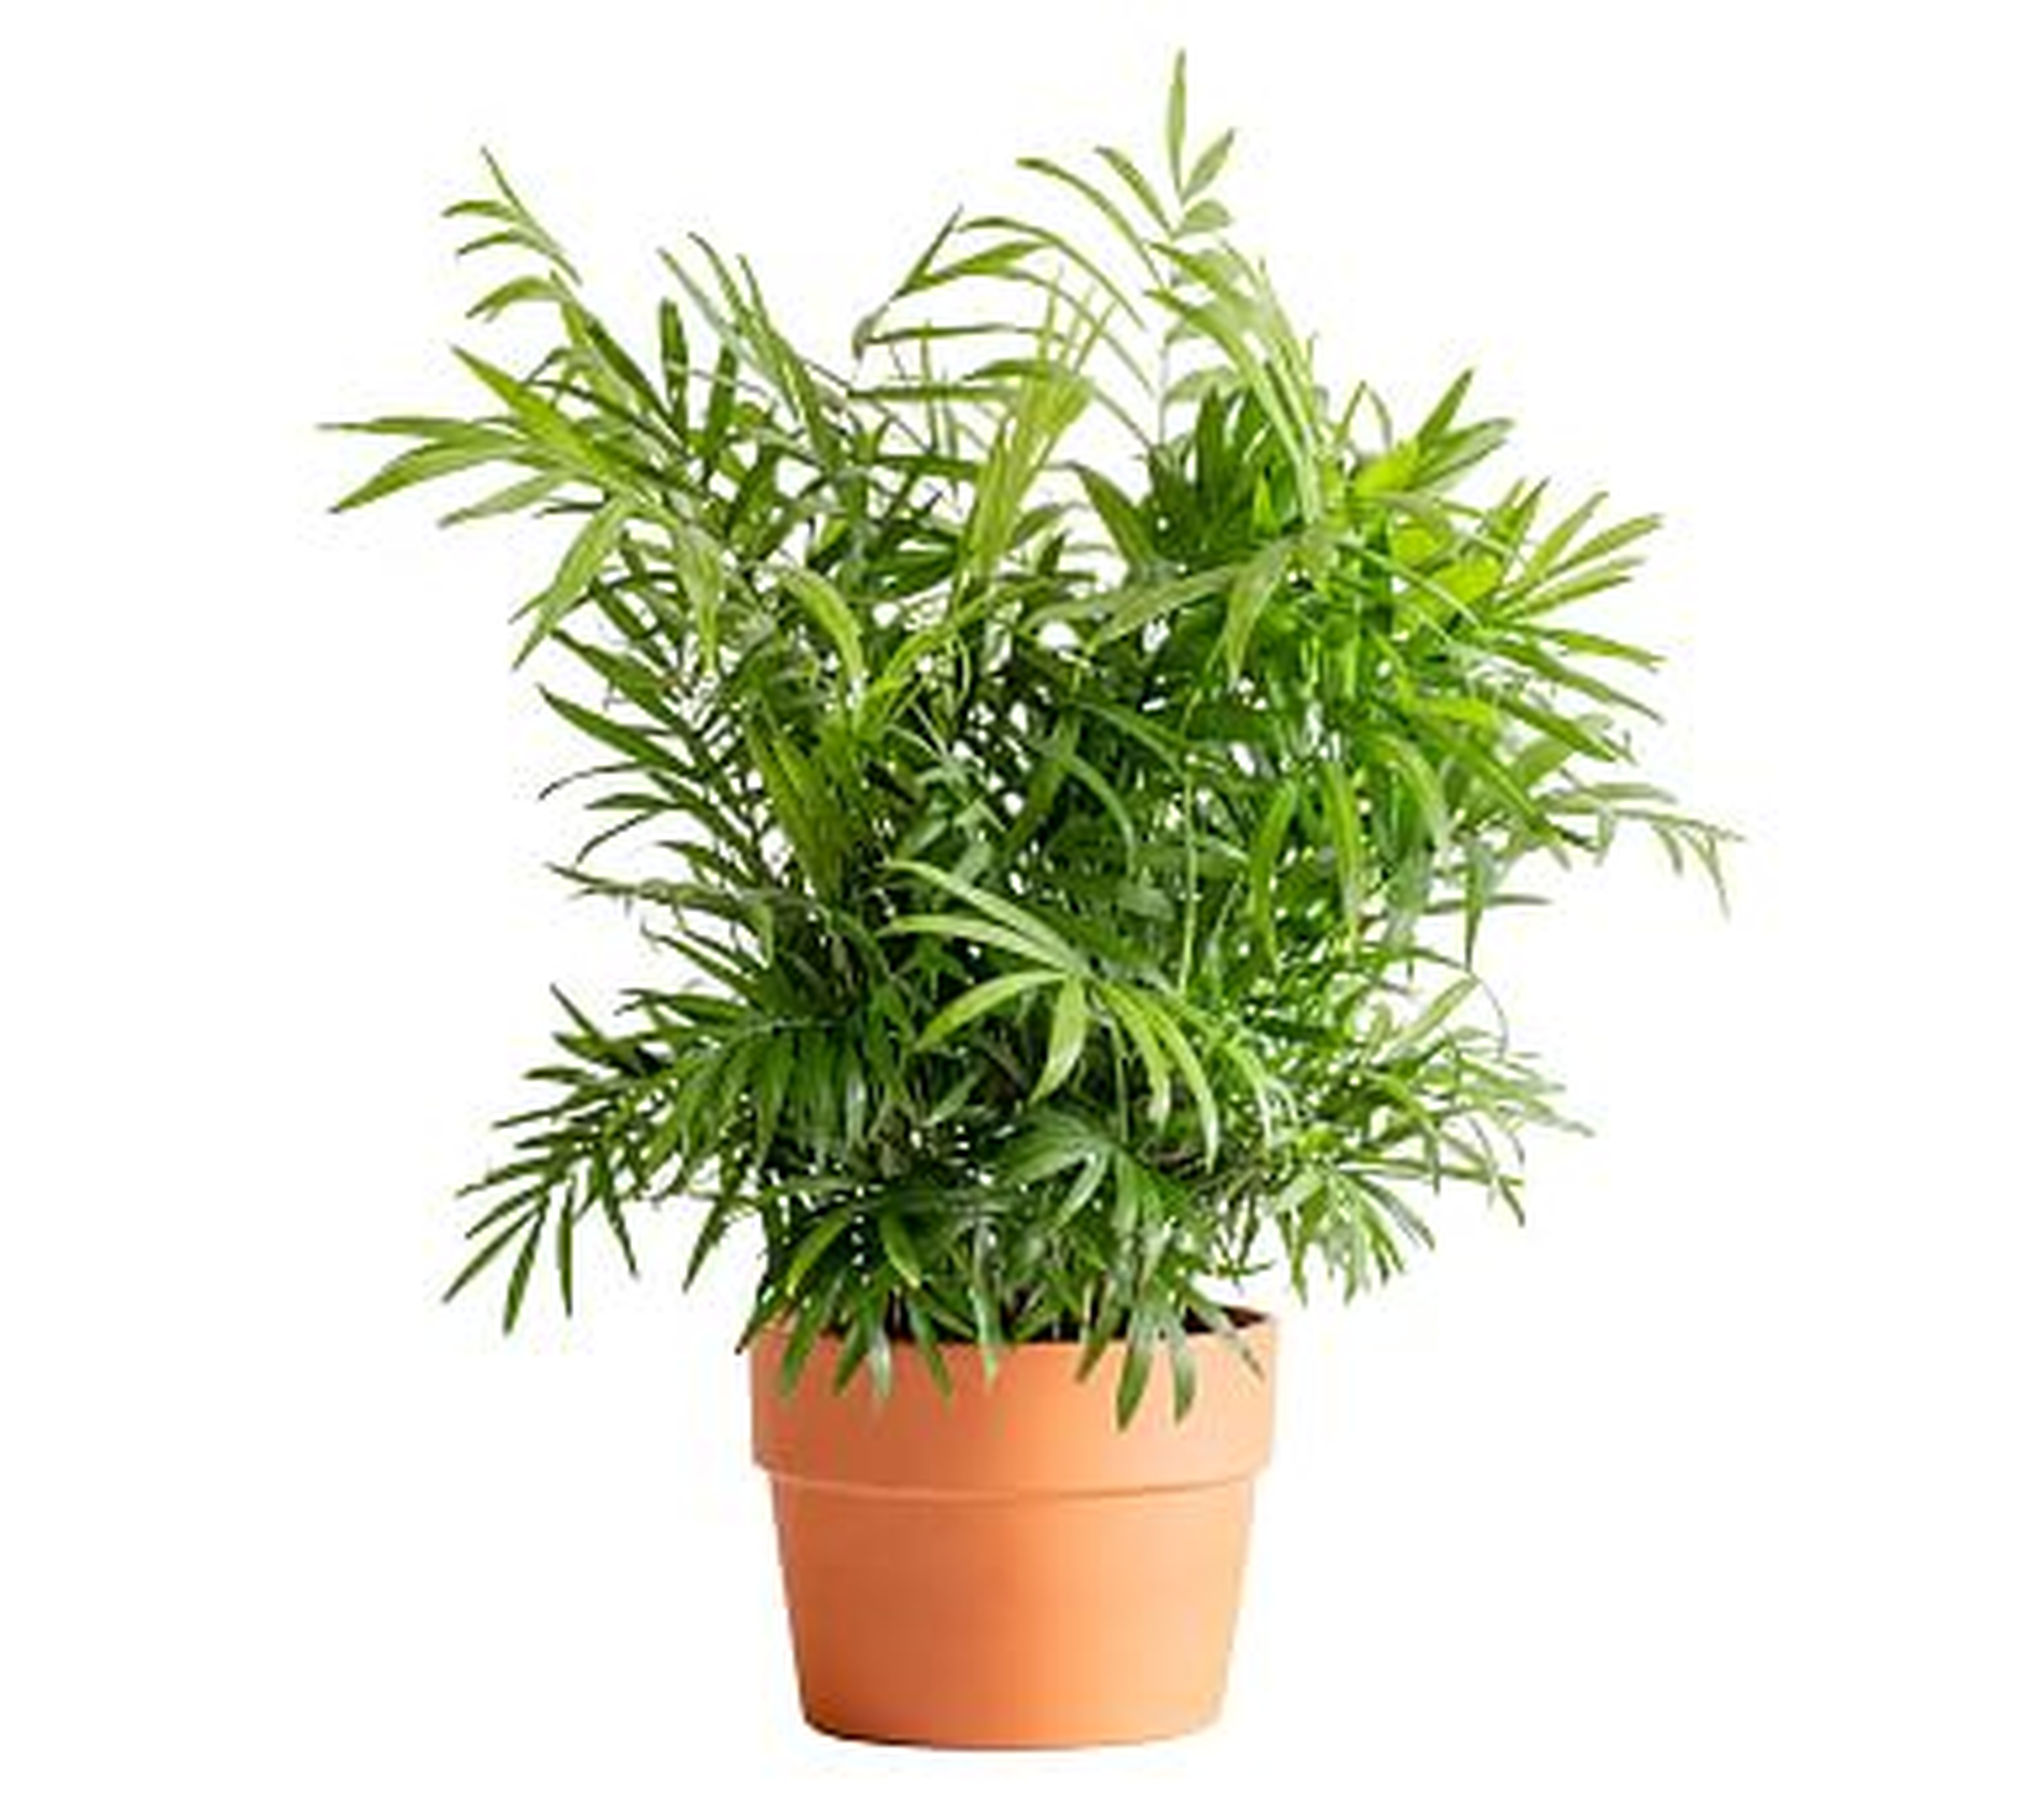 Live Parlor Palm Plant in Terra Cotta Pot - 6" - Pottery Barn